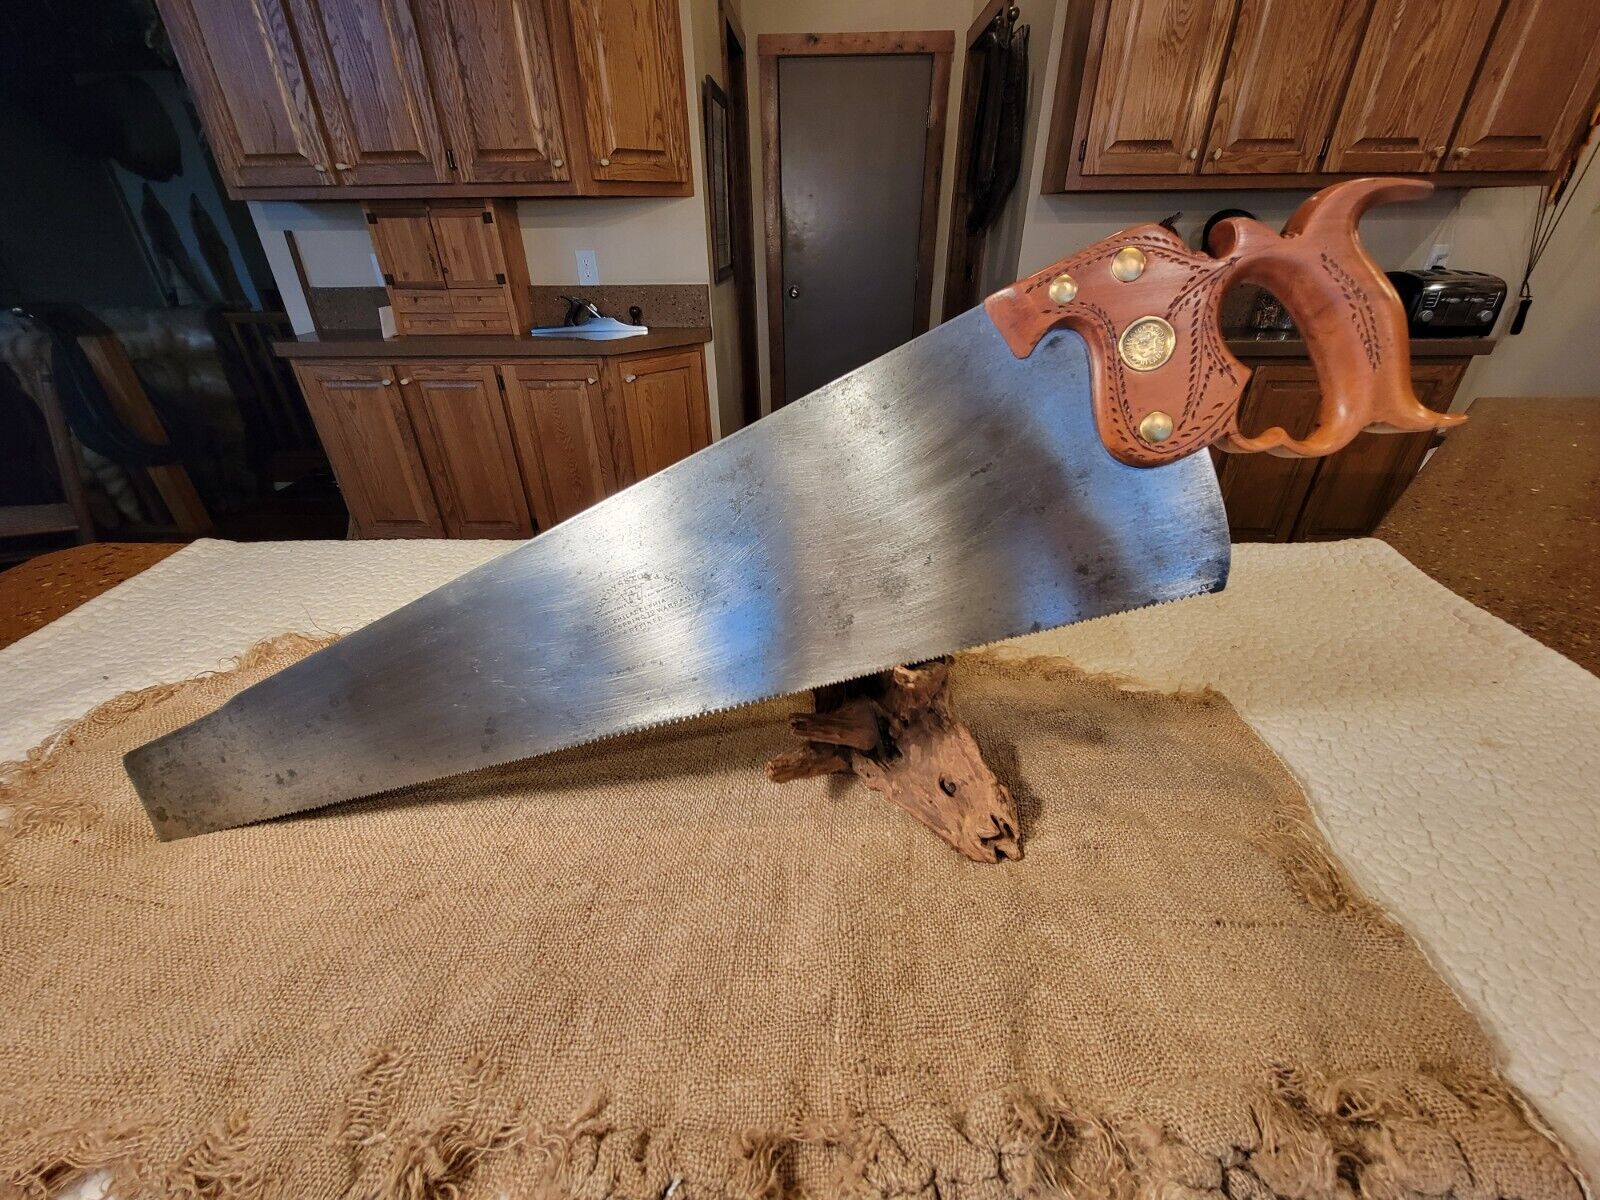 Antique Henry Disston & Sons London 12 Spring Hand Saw late 1800s